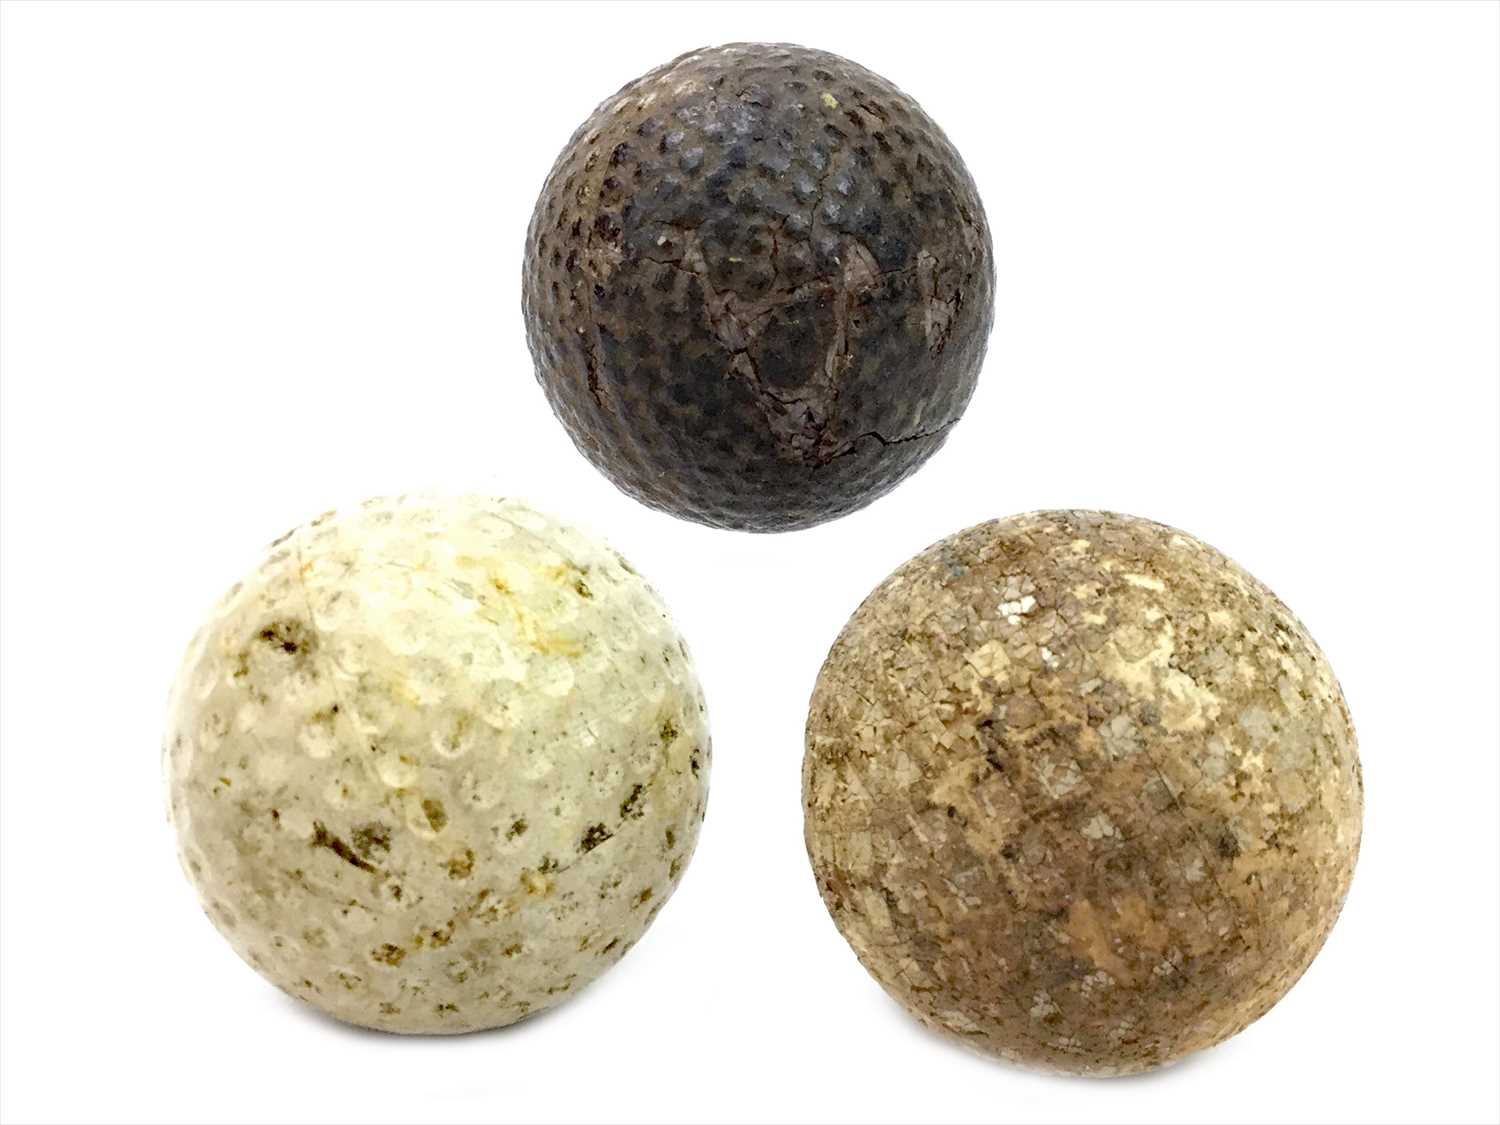 Lot 1728 - AN LATE 19TH/EARLY 20TH CENTURY HASKELL TYPE GOLF BALL ALONG WITH TWO OTHERS